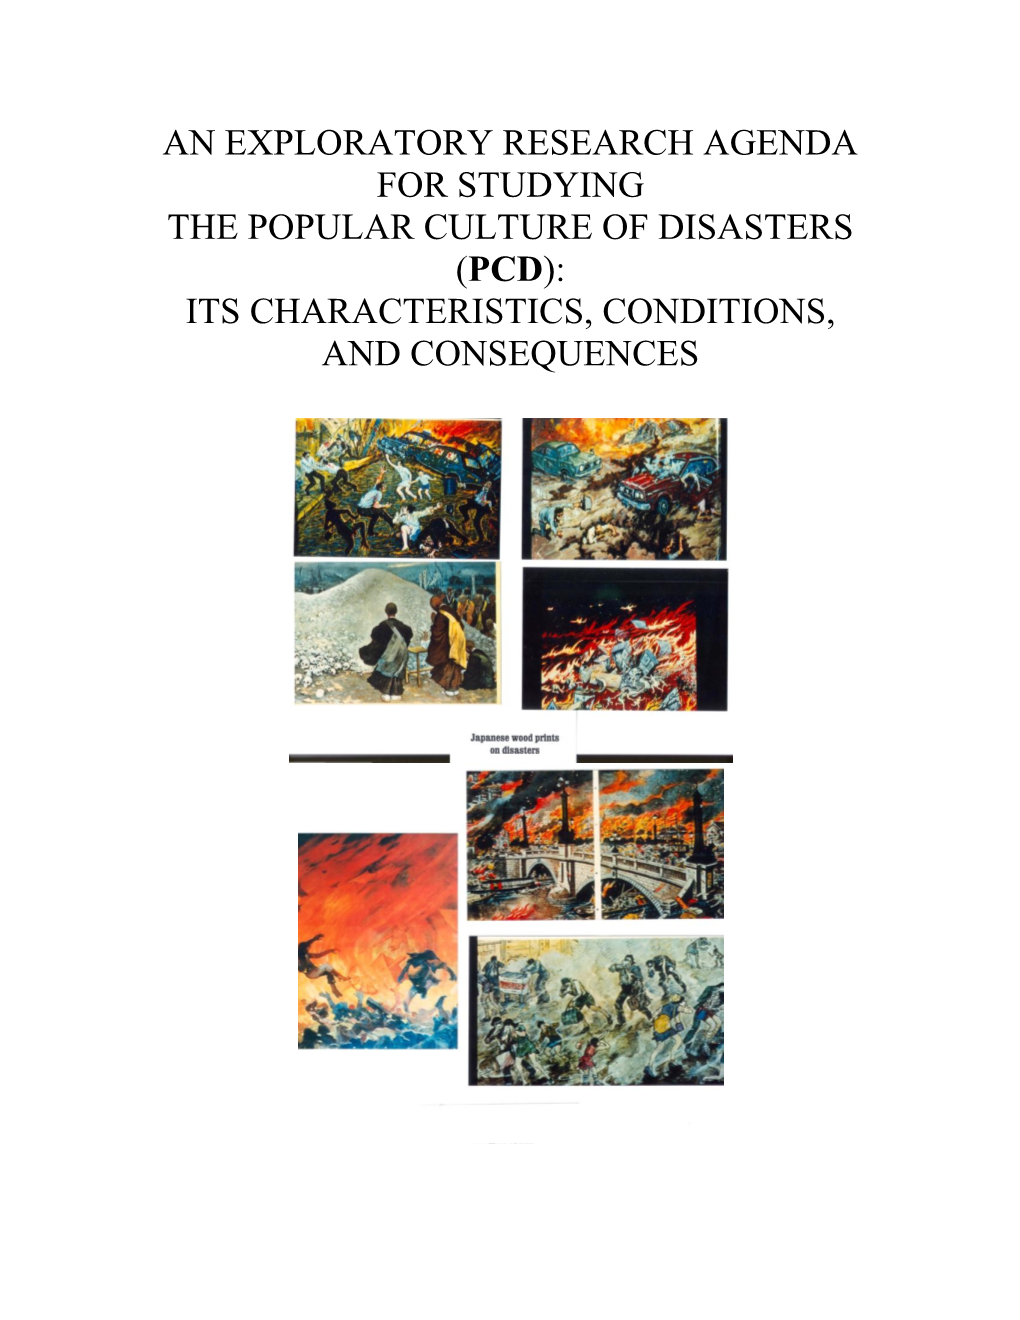 An Exploratory Research Agenda for Studying the Popular Culture of Disasters (Pcd): Its Characteristics, Conditions, and Consequences